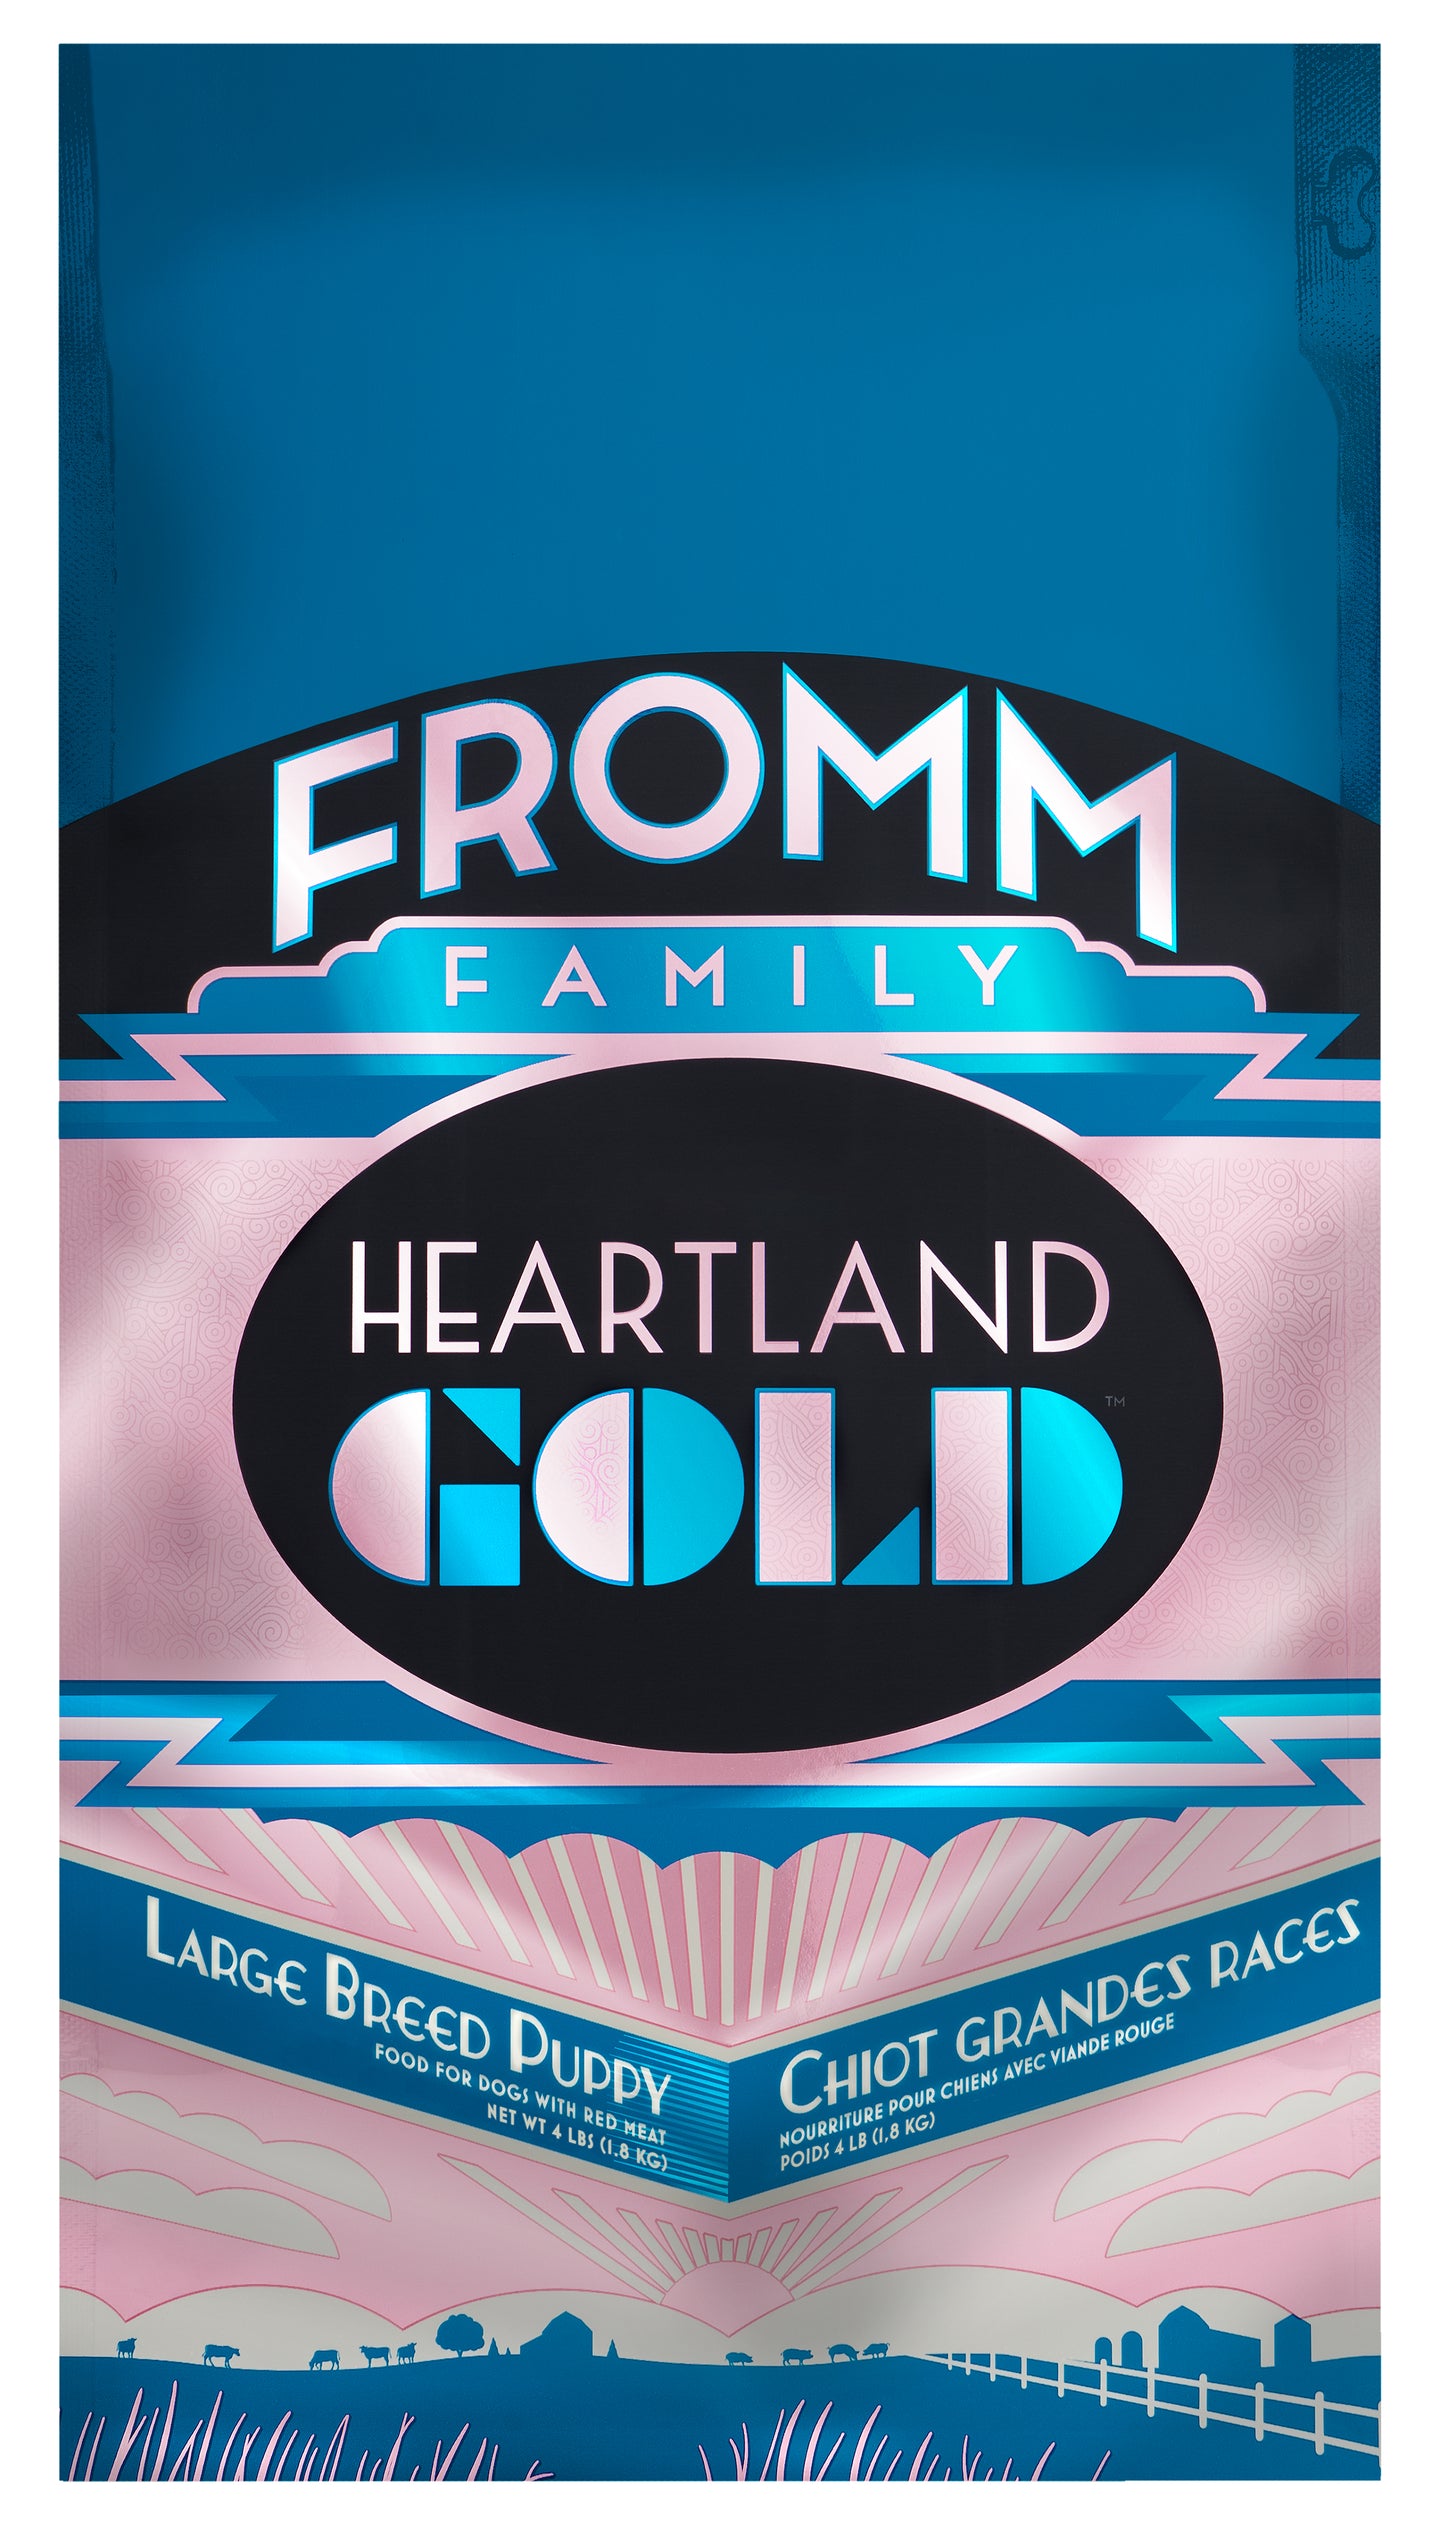 Fromm Heartland Gold Large Breed Puppy Grain Free Dry Dog Food, 4lb Bag